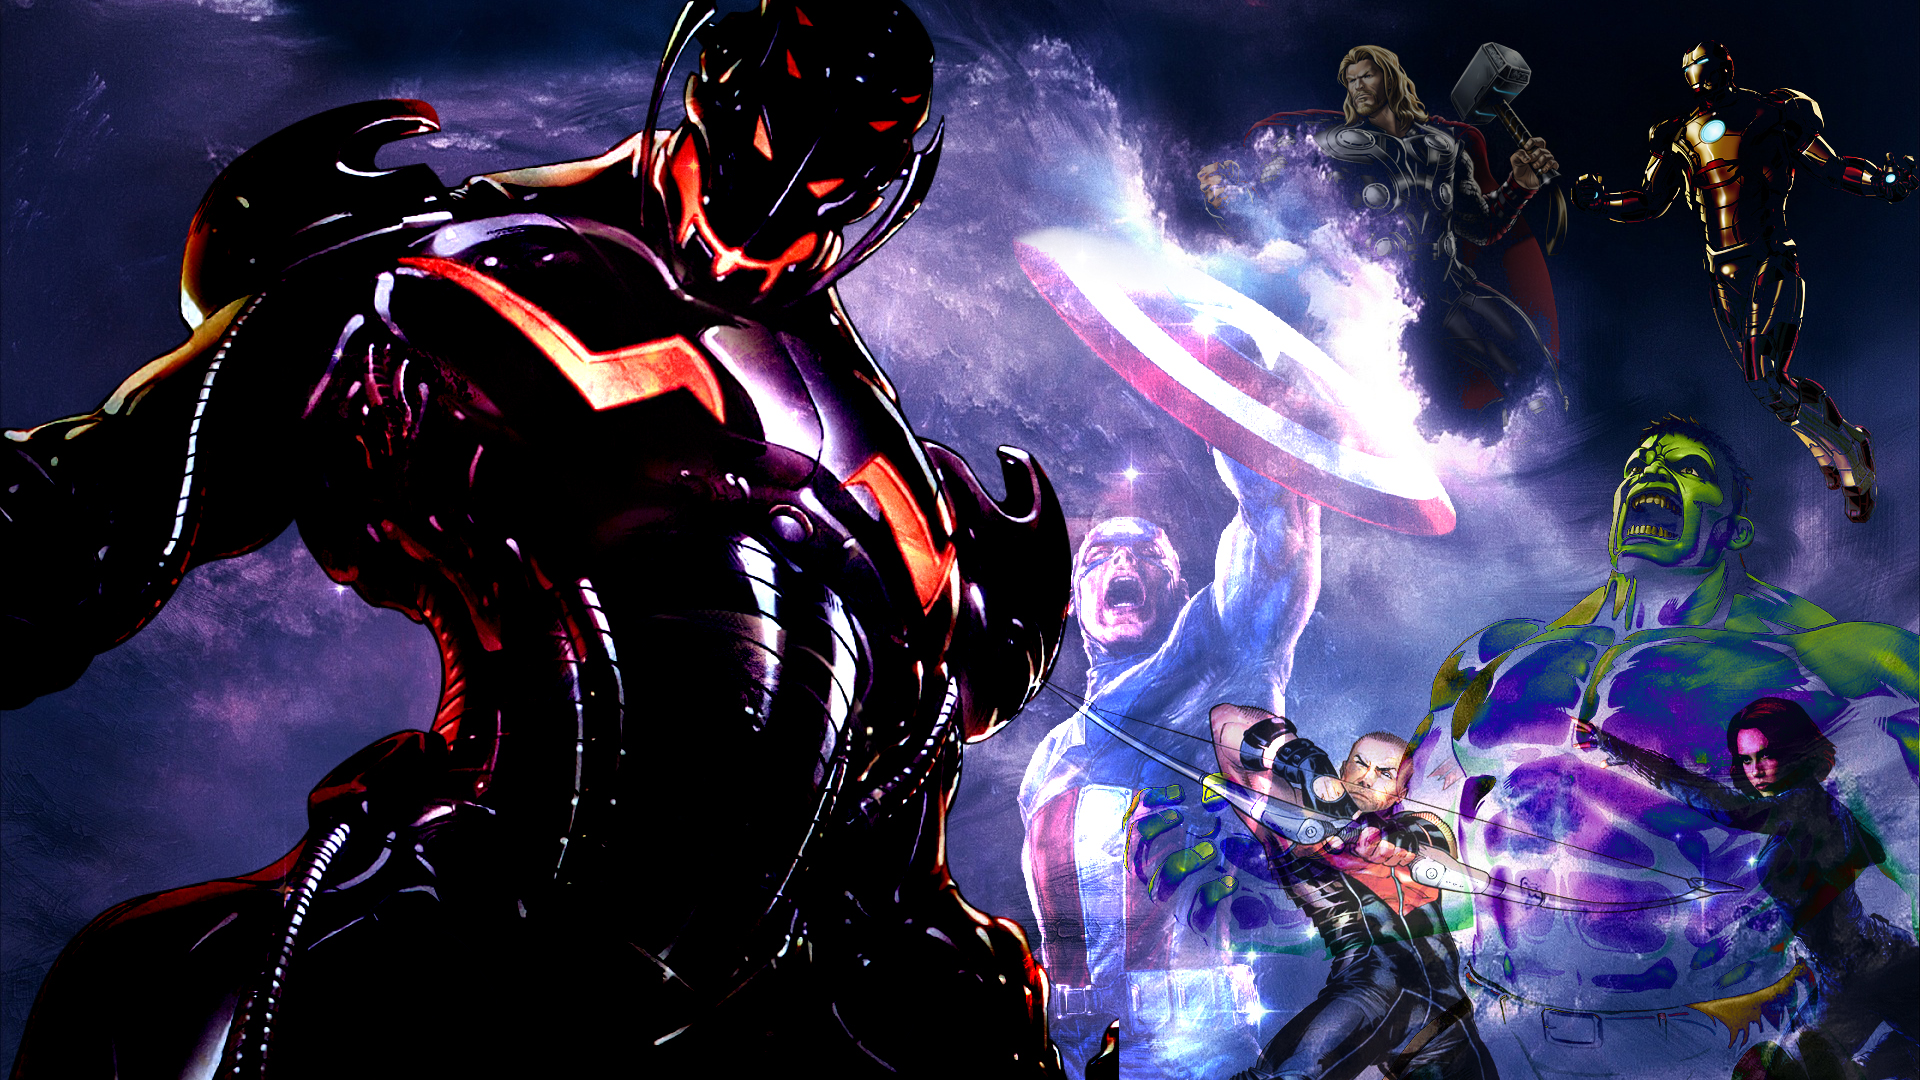 Free download Age Of Ultron Wallpaper by 19genocide87 [1920x1080